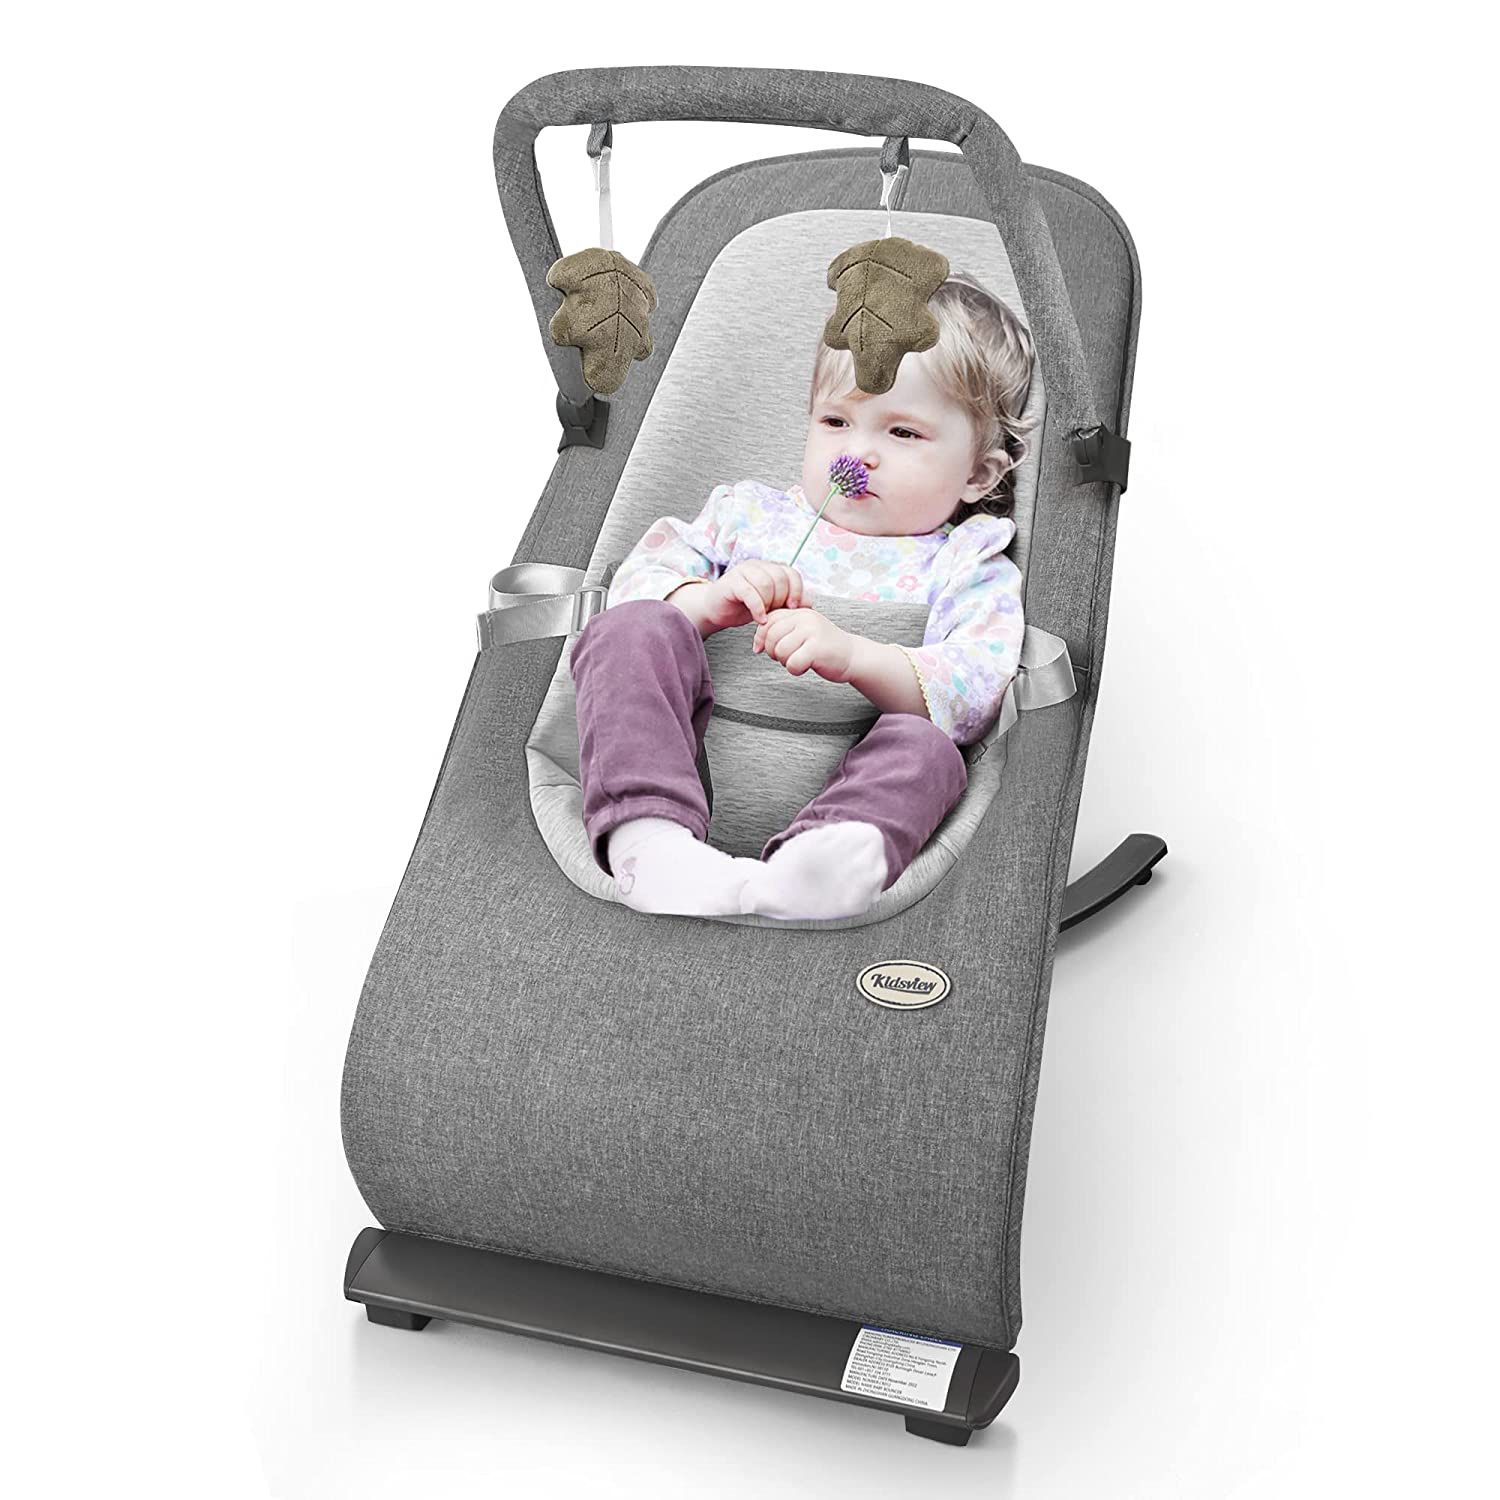 Baby Bouncer, Portable Bouncer Portable Rocker Chair for Babies, Baby Swing 3-Point Harness for Newborn Babies (Dark Grey)